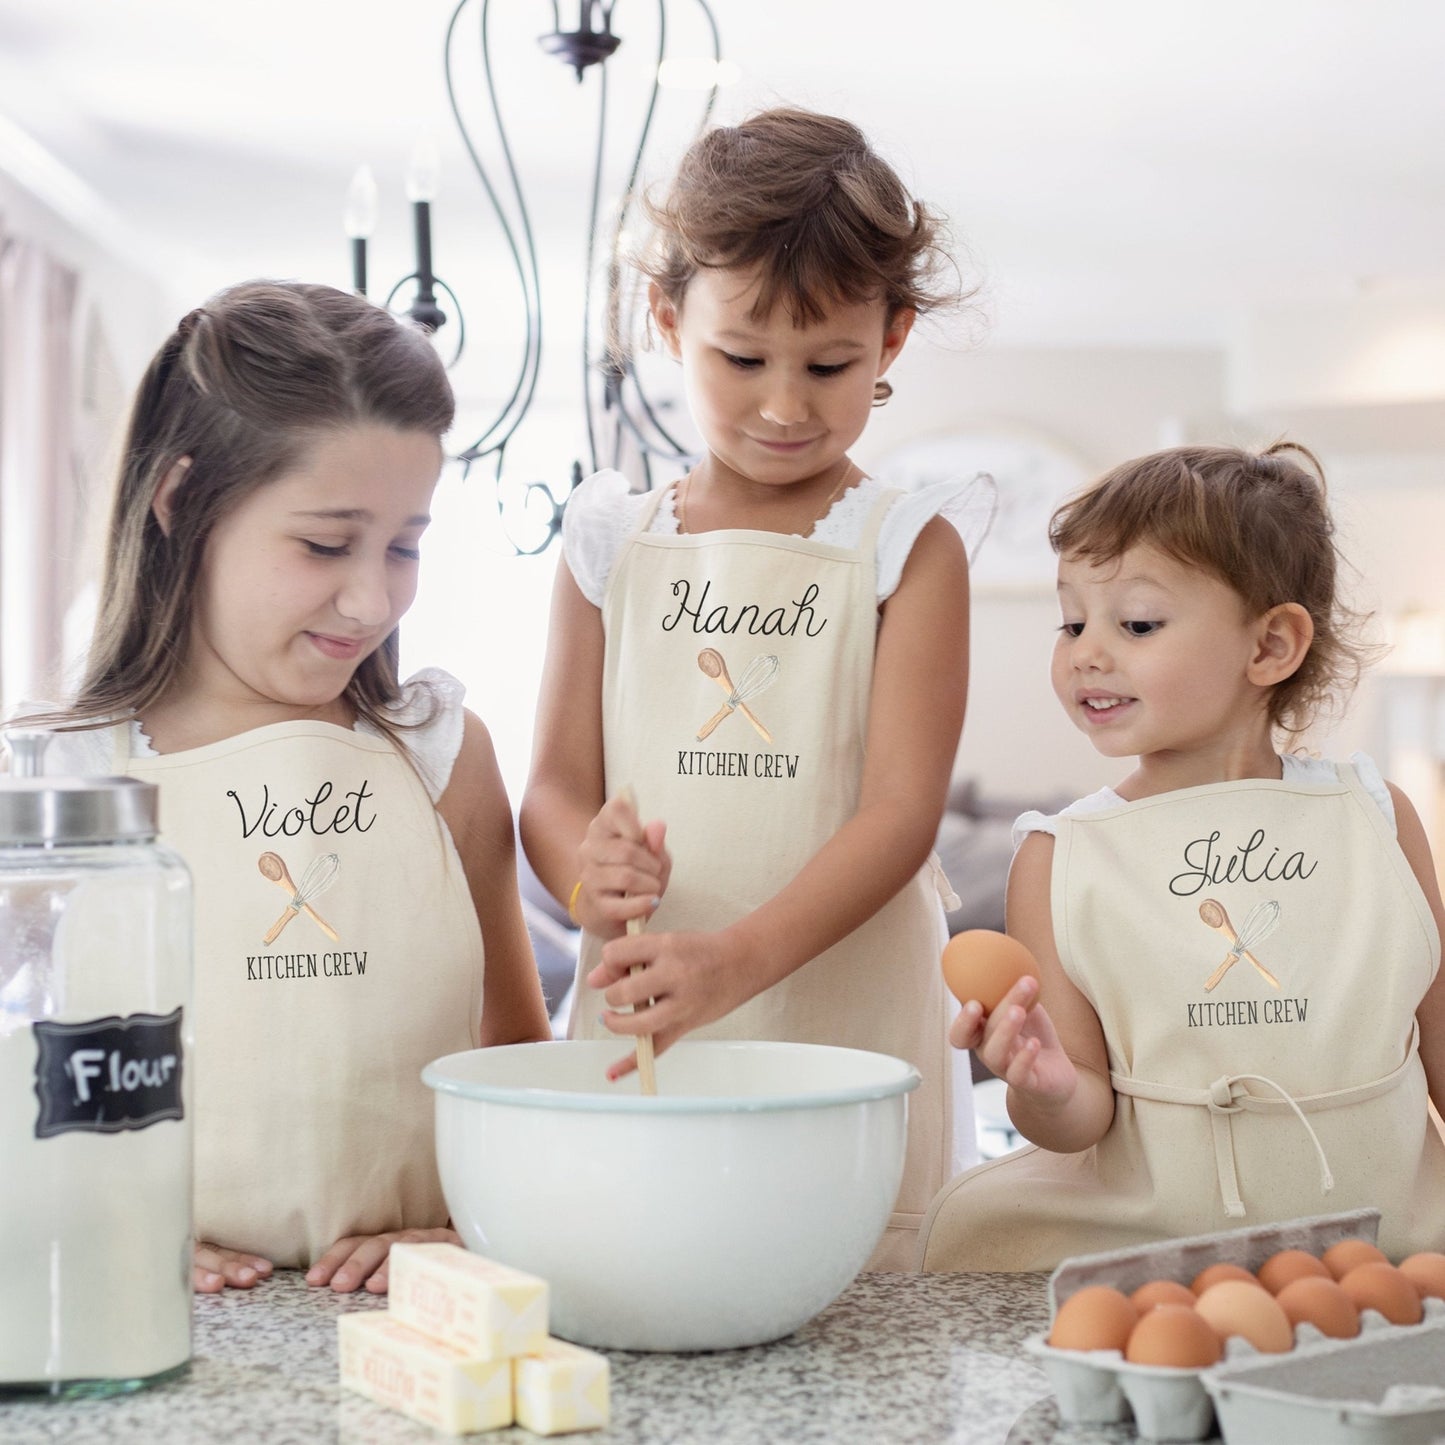 https://cdn.shopify.com/s/files/1/0667/8039/7863/products/kitchen-crew-kids-apron-cousins-apron-gift-idea-sisters-gift-idea-holiday-baking-gift-idea-personalized-kids-kitchen-apron-613087_1445x.jpg?v=1668884077